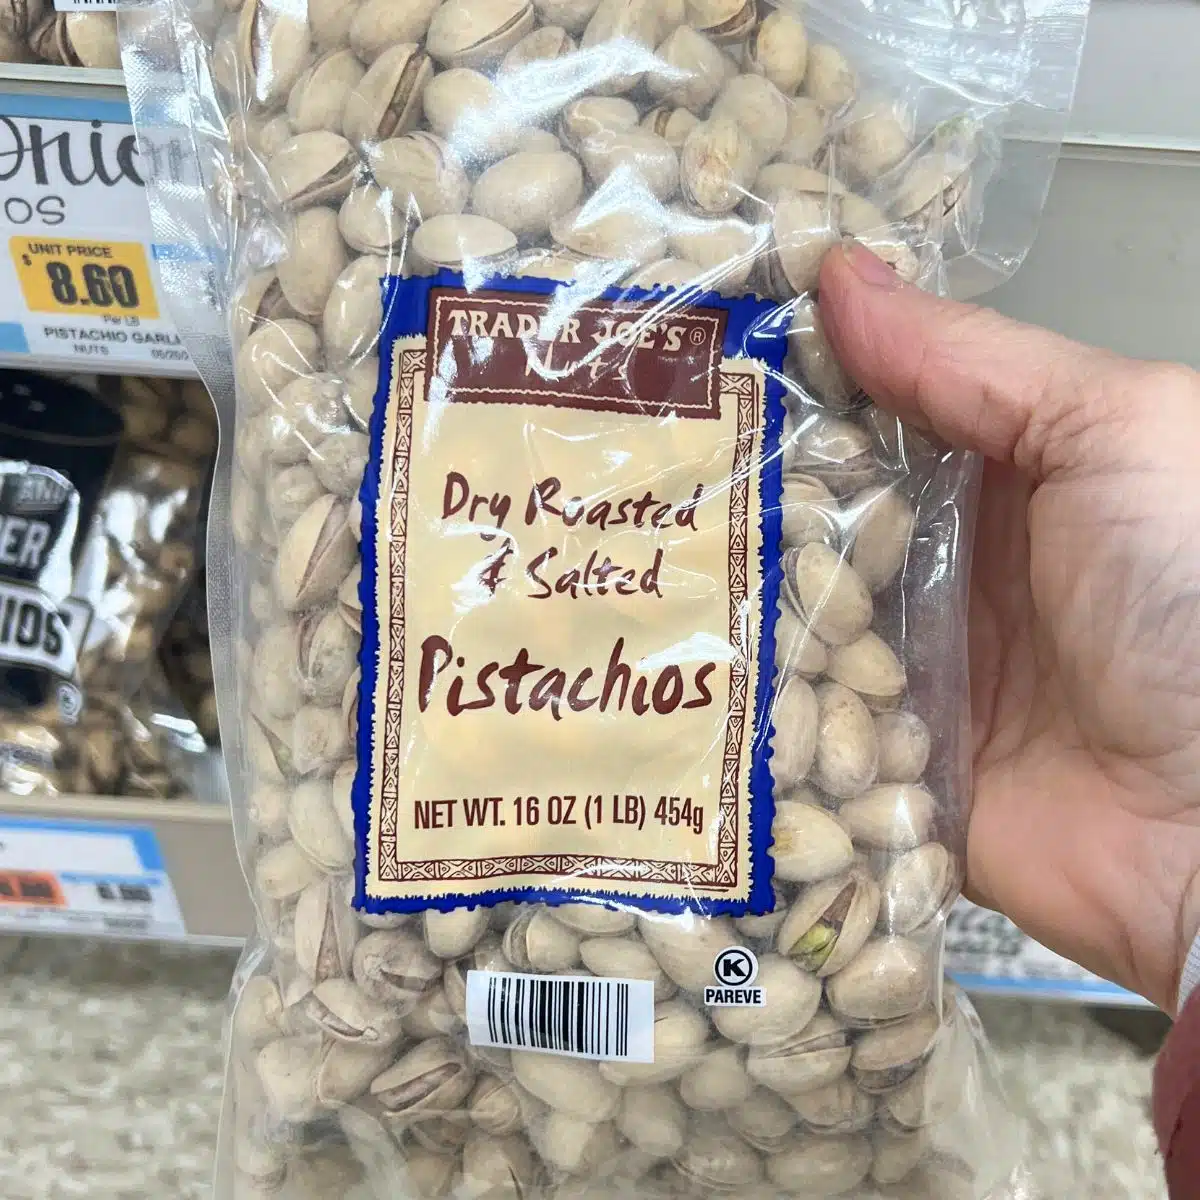 TRADER JOES Dry roasted and Salted Pistachios. 